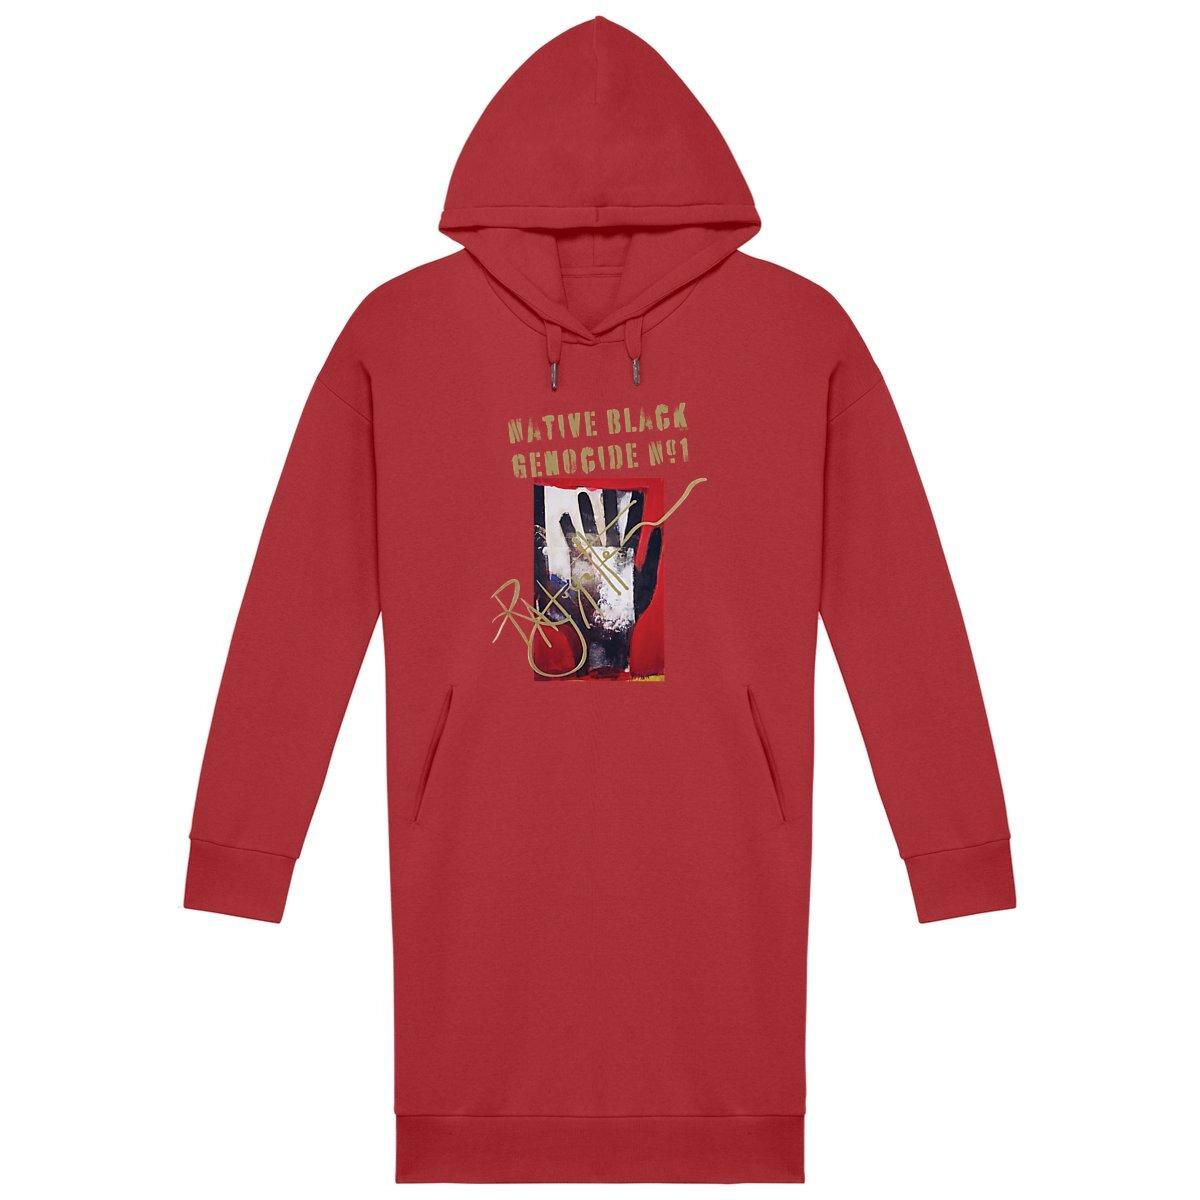 Native Black Genocide #1 Women's Comfy Fit Hoodie Dress, premium plus, designed by Tree of Life Art, combines style with social awareness.